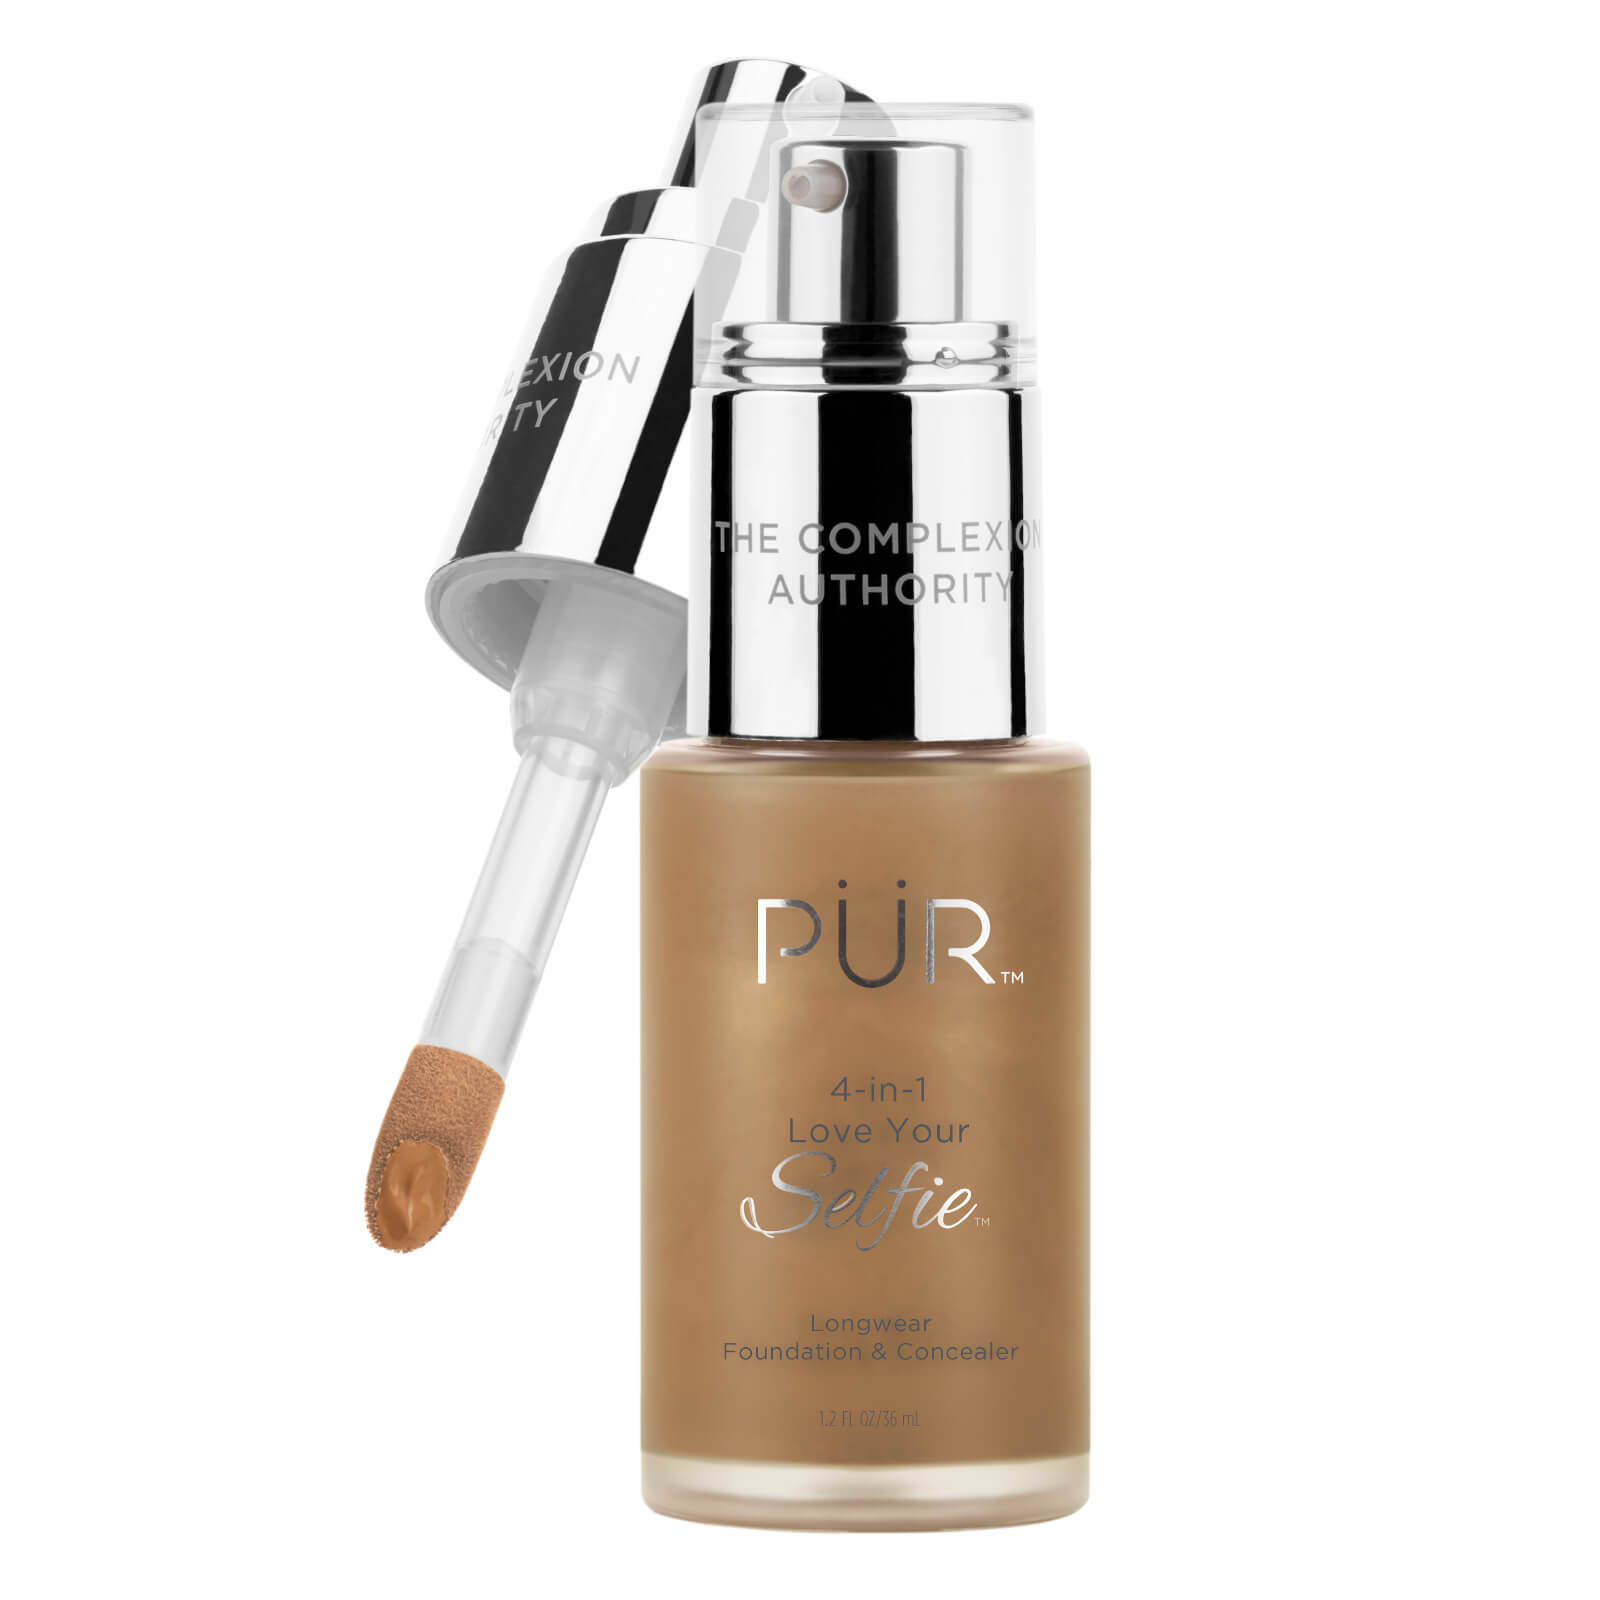 PÜR 4-in-1 Love Your Selfie Longwear Foundation and Concealer 30ml (Various Shades) - DG3